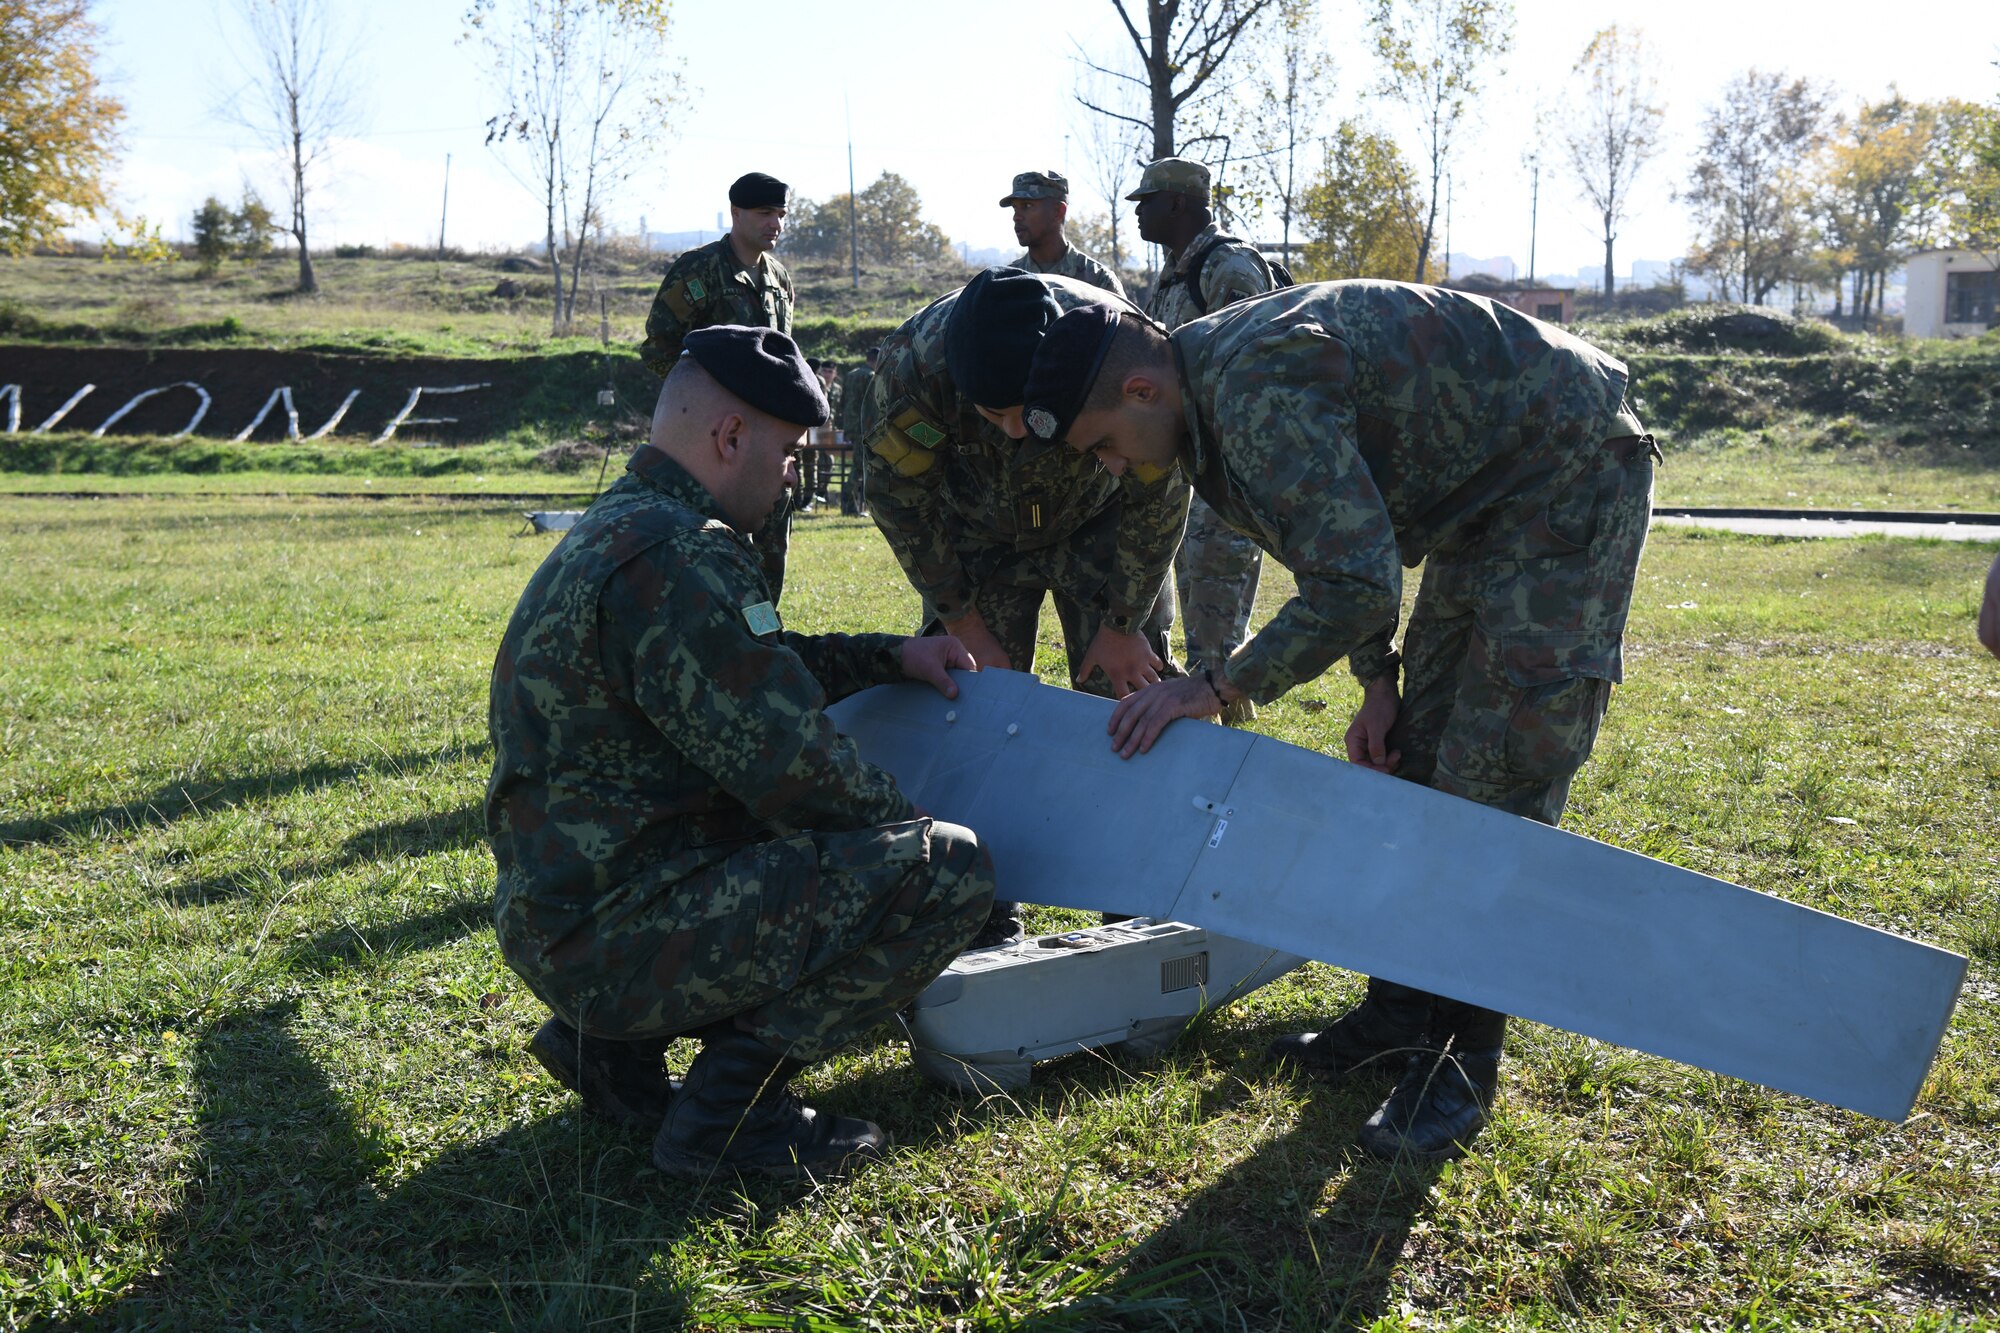 Albanian Armed Forces members conducting setup procedures of the Puma AE3 DDL drone.